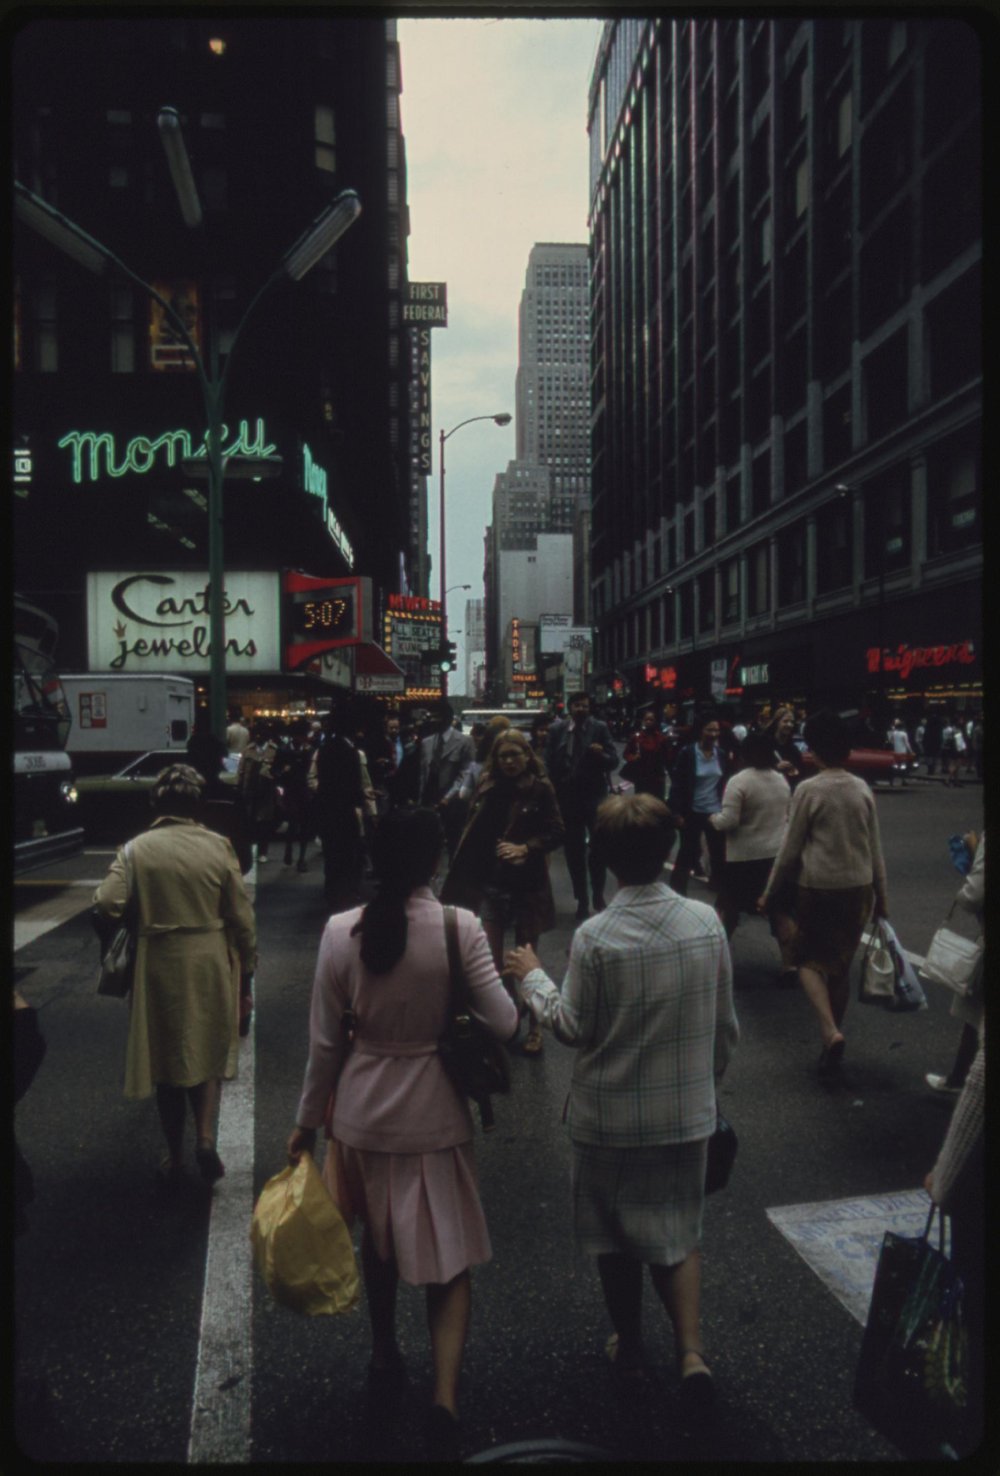    The U.S. National Archives   , State Street In Downtown Chicago, Illinois, Part Of What Is Known As The "Loop", 10/1973    Original Caption:  State Street In Downtown Chicago, Illinois, Part Of What Is Known As The "Loop". It Is A Typical Scene Of